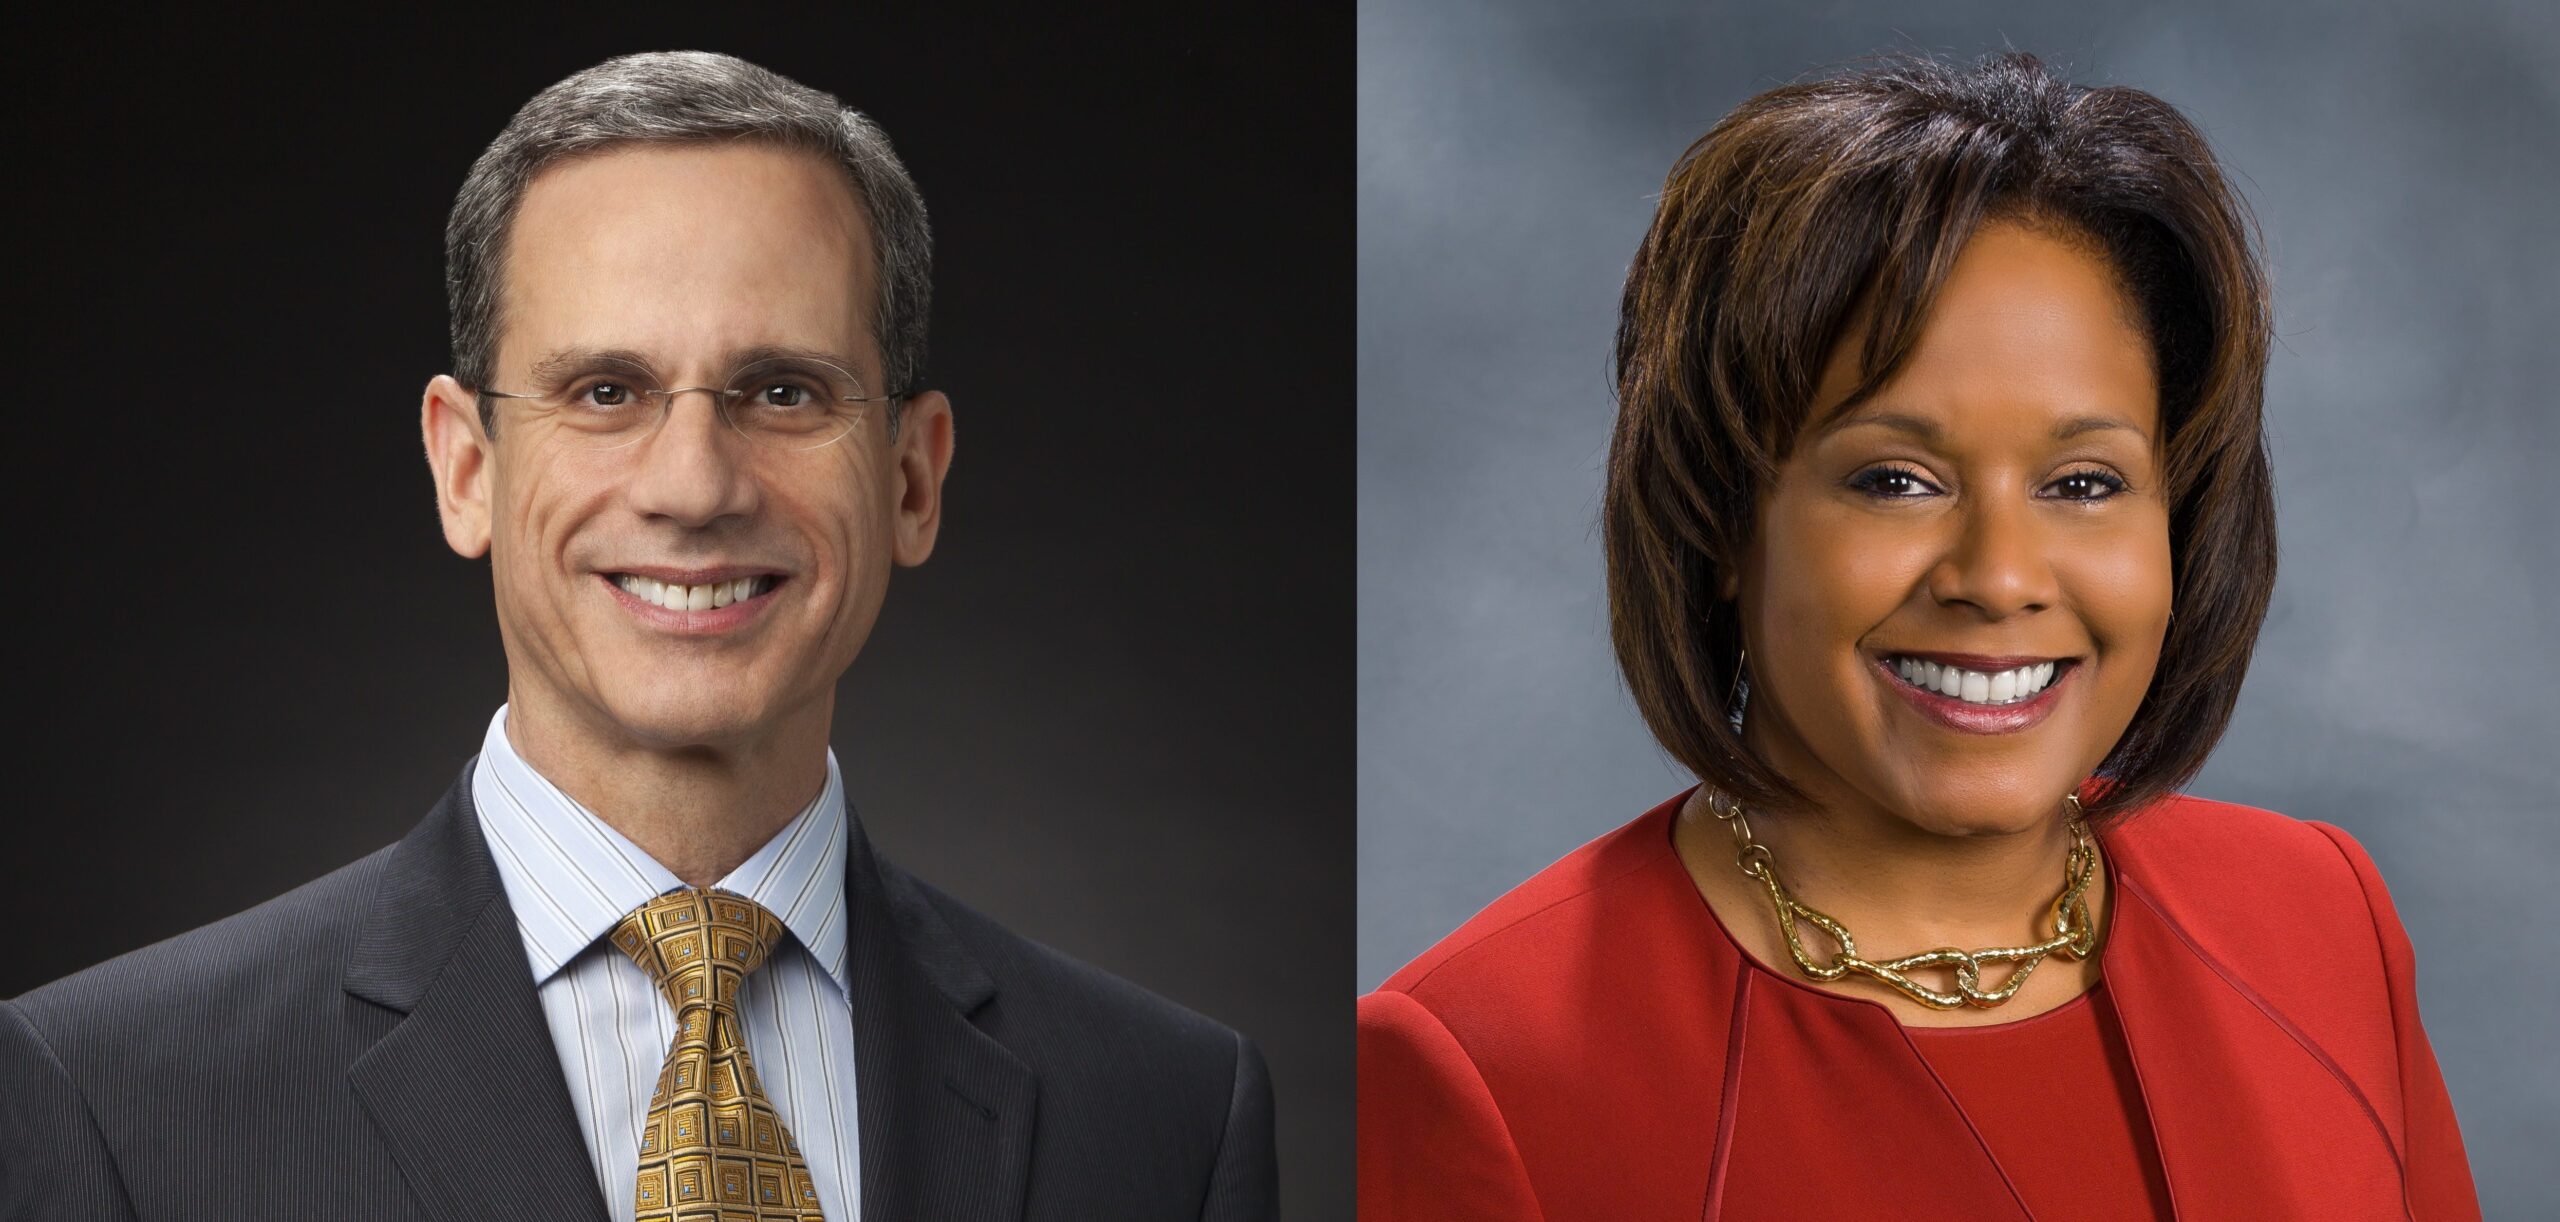 Global leaders in research and industry to address UMBC’s Class of 2017